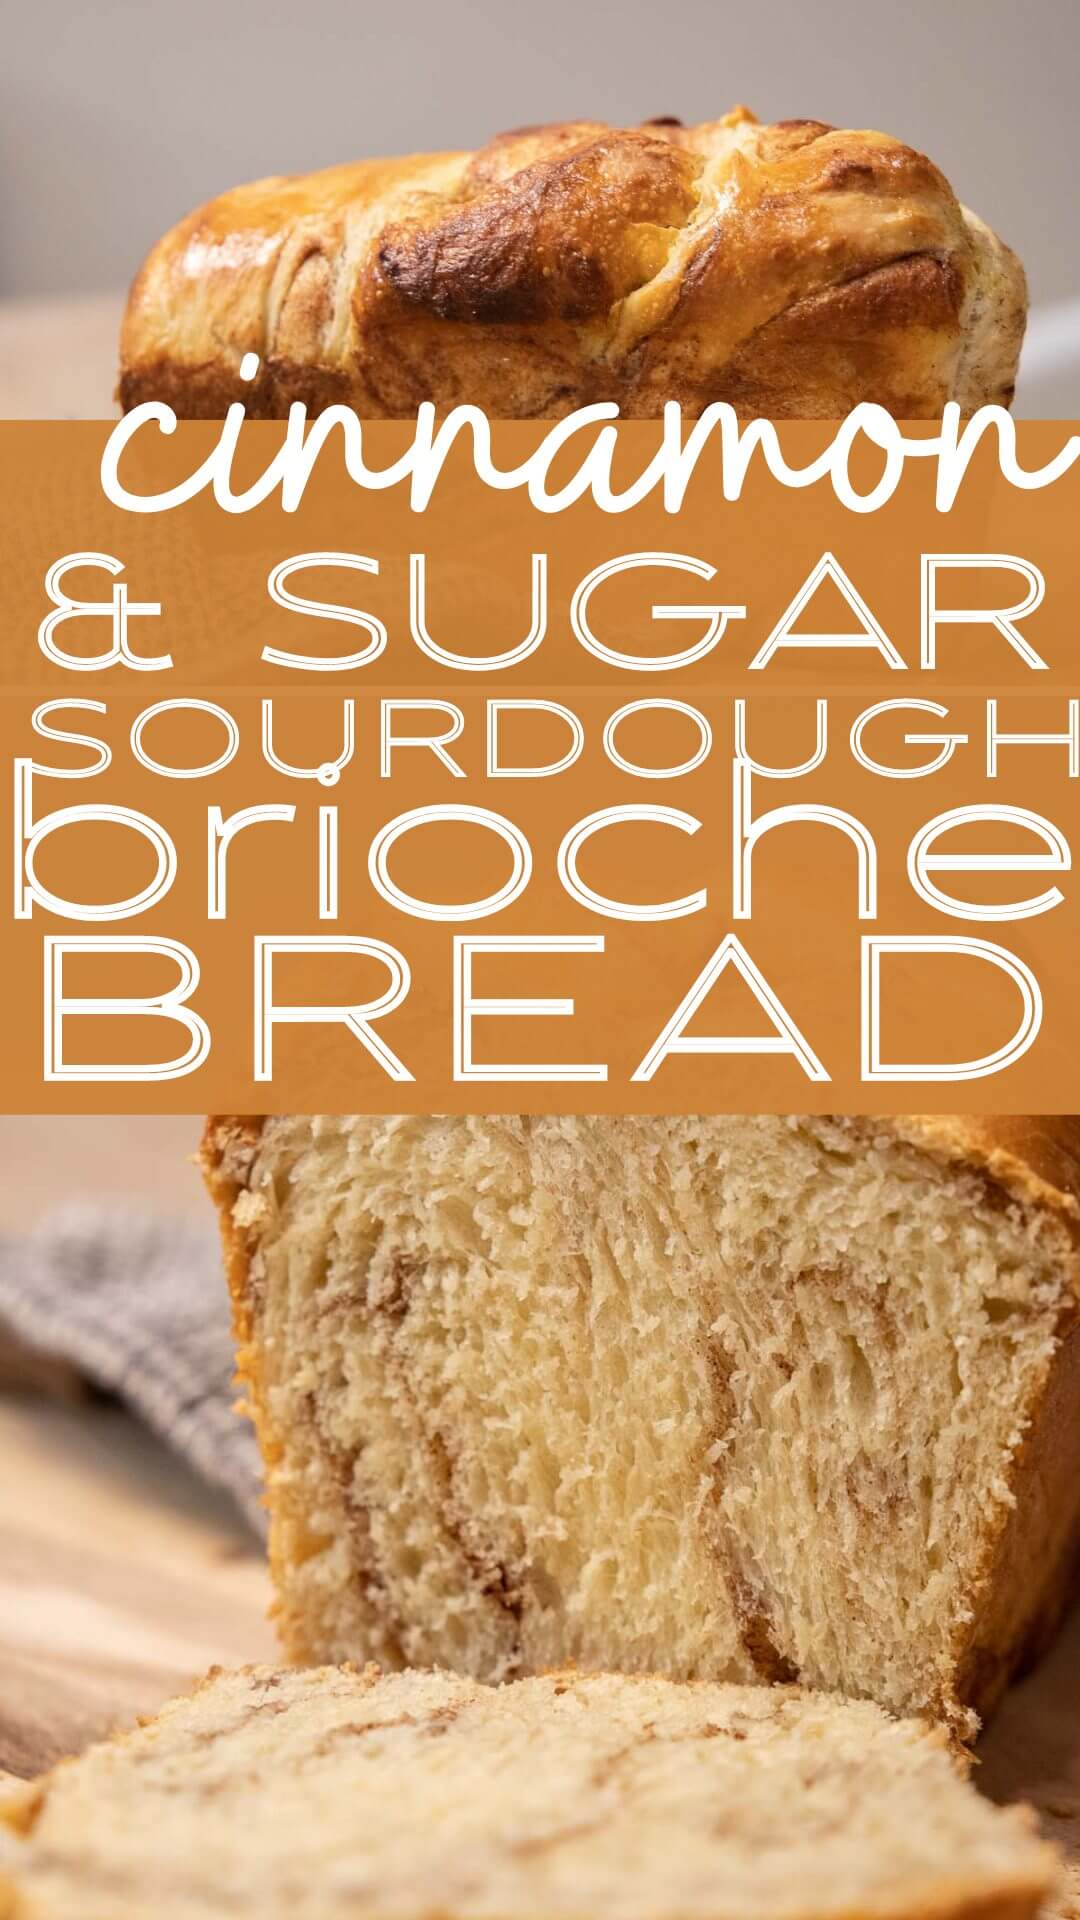 Make this  amazing cinnamon and sugar sourdough brioche bread for an amazing treat! It makes amazing french toast or eaten just as is!